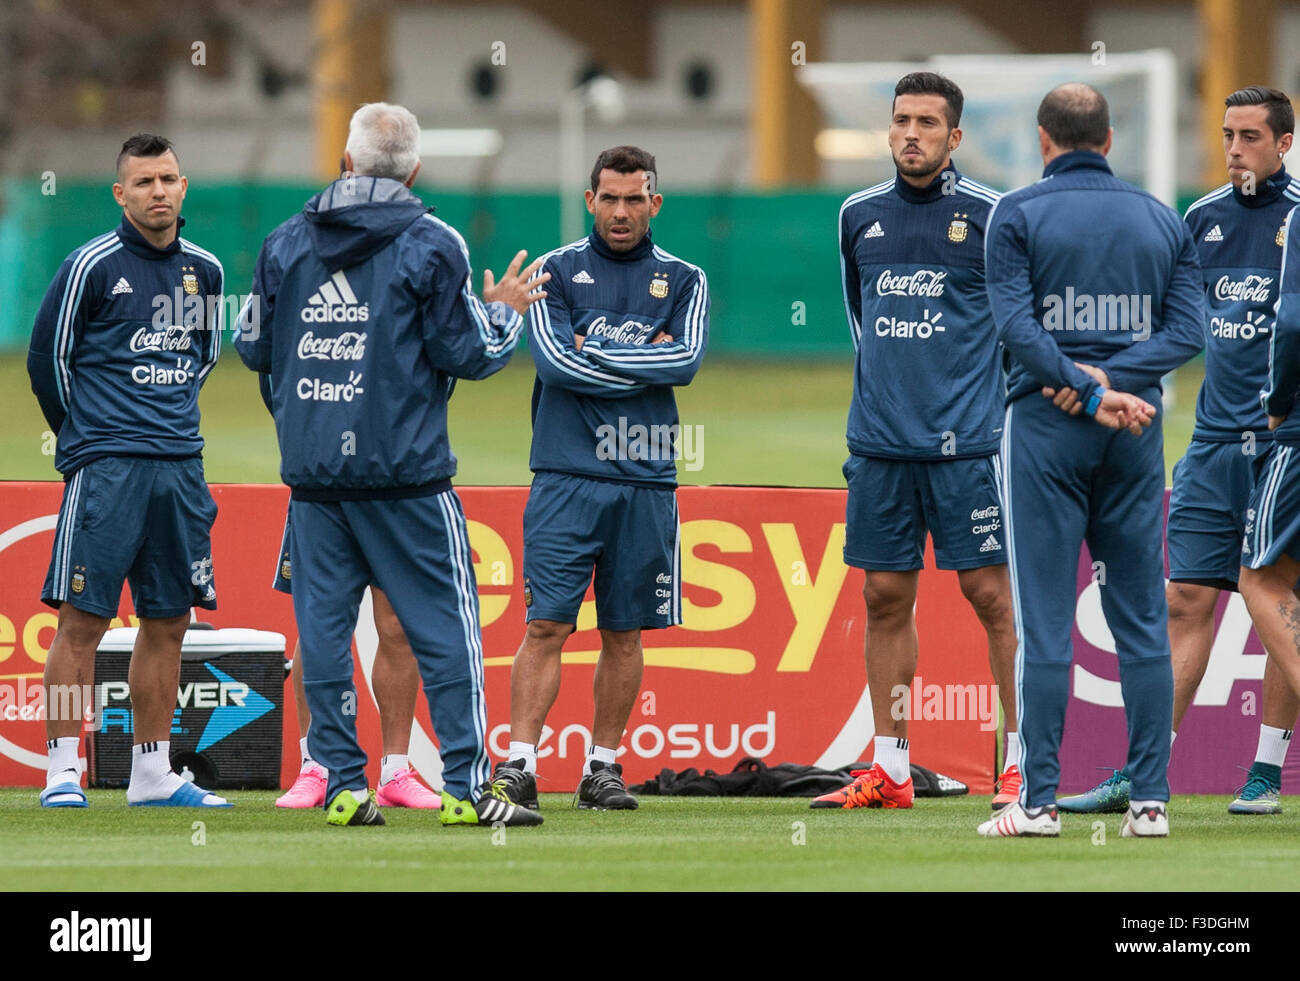 Ezeiza, Carlos Tevez (3rd L). 5th Oct, 2015. Sergio Aguero (1st L), Carlos Tevez (3rd L), Ezequiel Garay (3rd R) and Ramiro Funes Mori (1st R) of Argentina's national soccer team take part in a training session in Ezeiza City Oct. 5, 2015. Argentina's national soccer team on Monday held a training session for the FIFA Russia 2018 World Cup qualifying match with Ecuador, to be held on Oct. 8 in Buenos Aires. © Martin Zabala/Xinhua/Alamy Live News Stock Photo